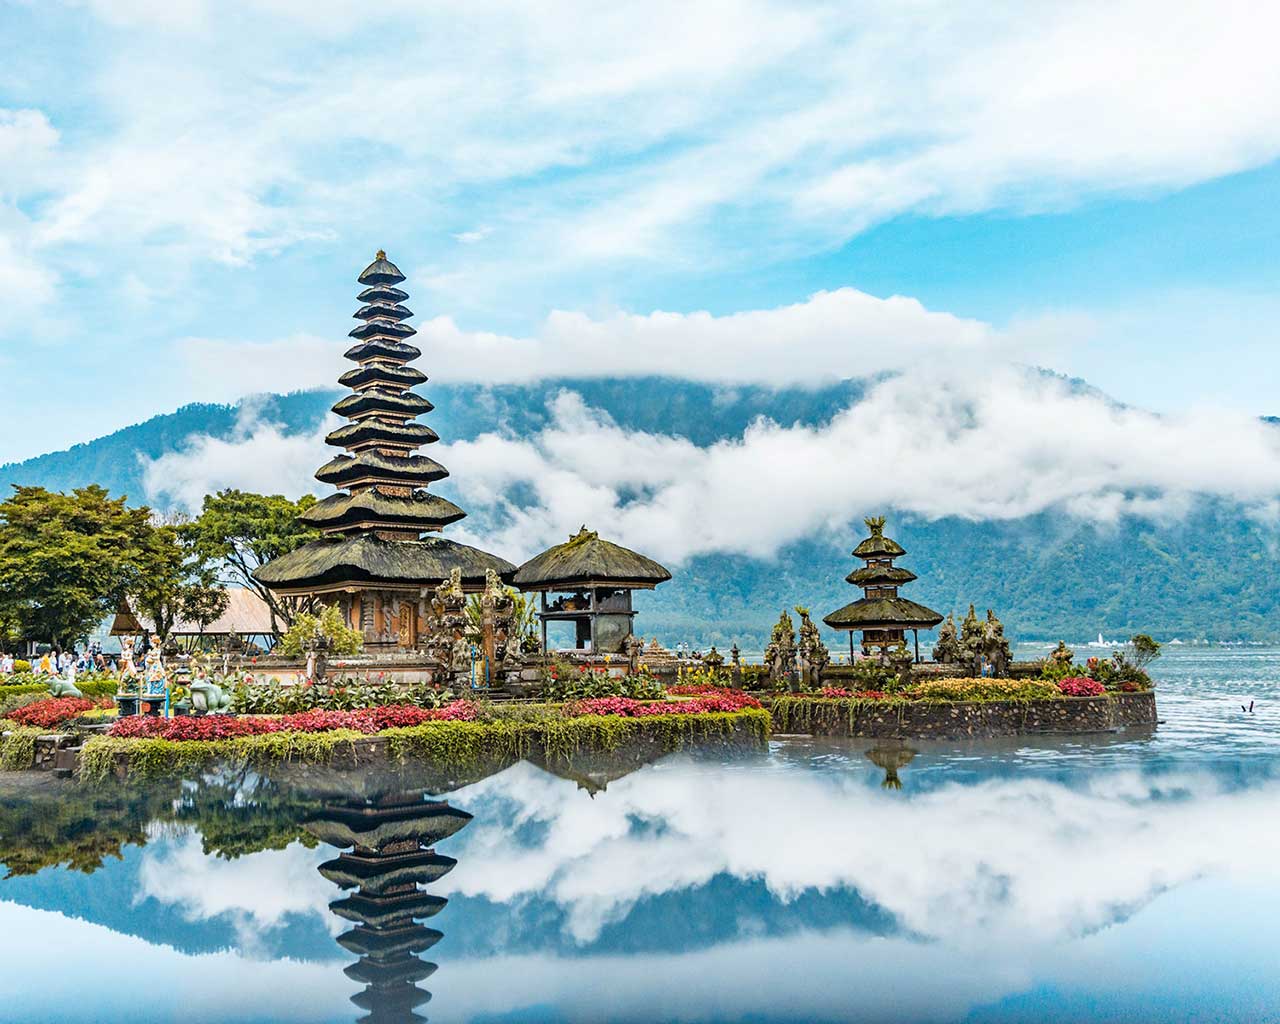 Bali, Indonesia, one of the top destinations to Visit as Cabin Crew.